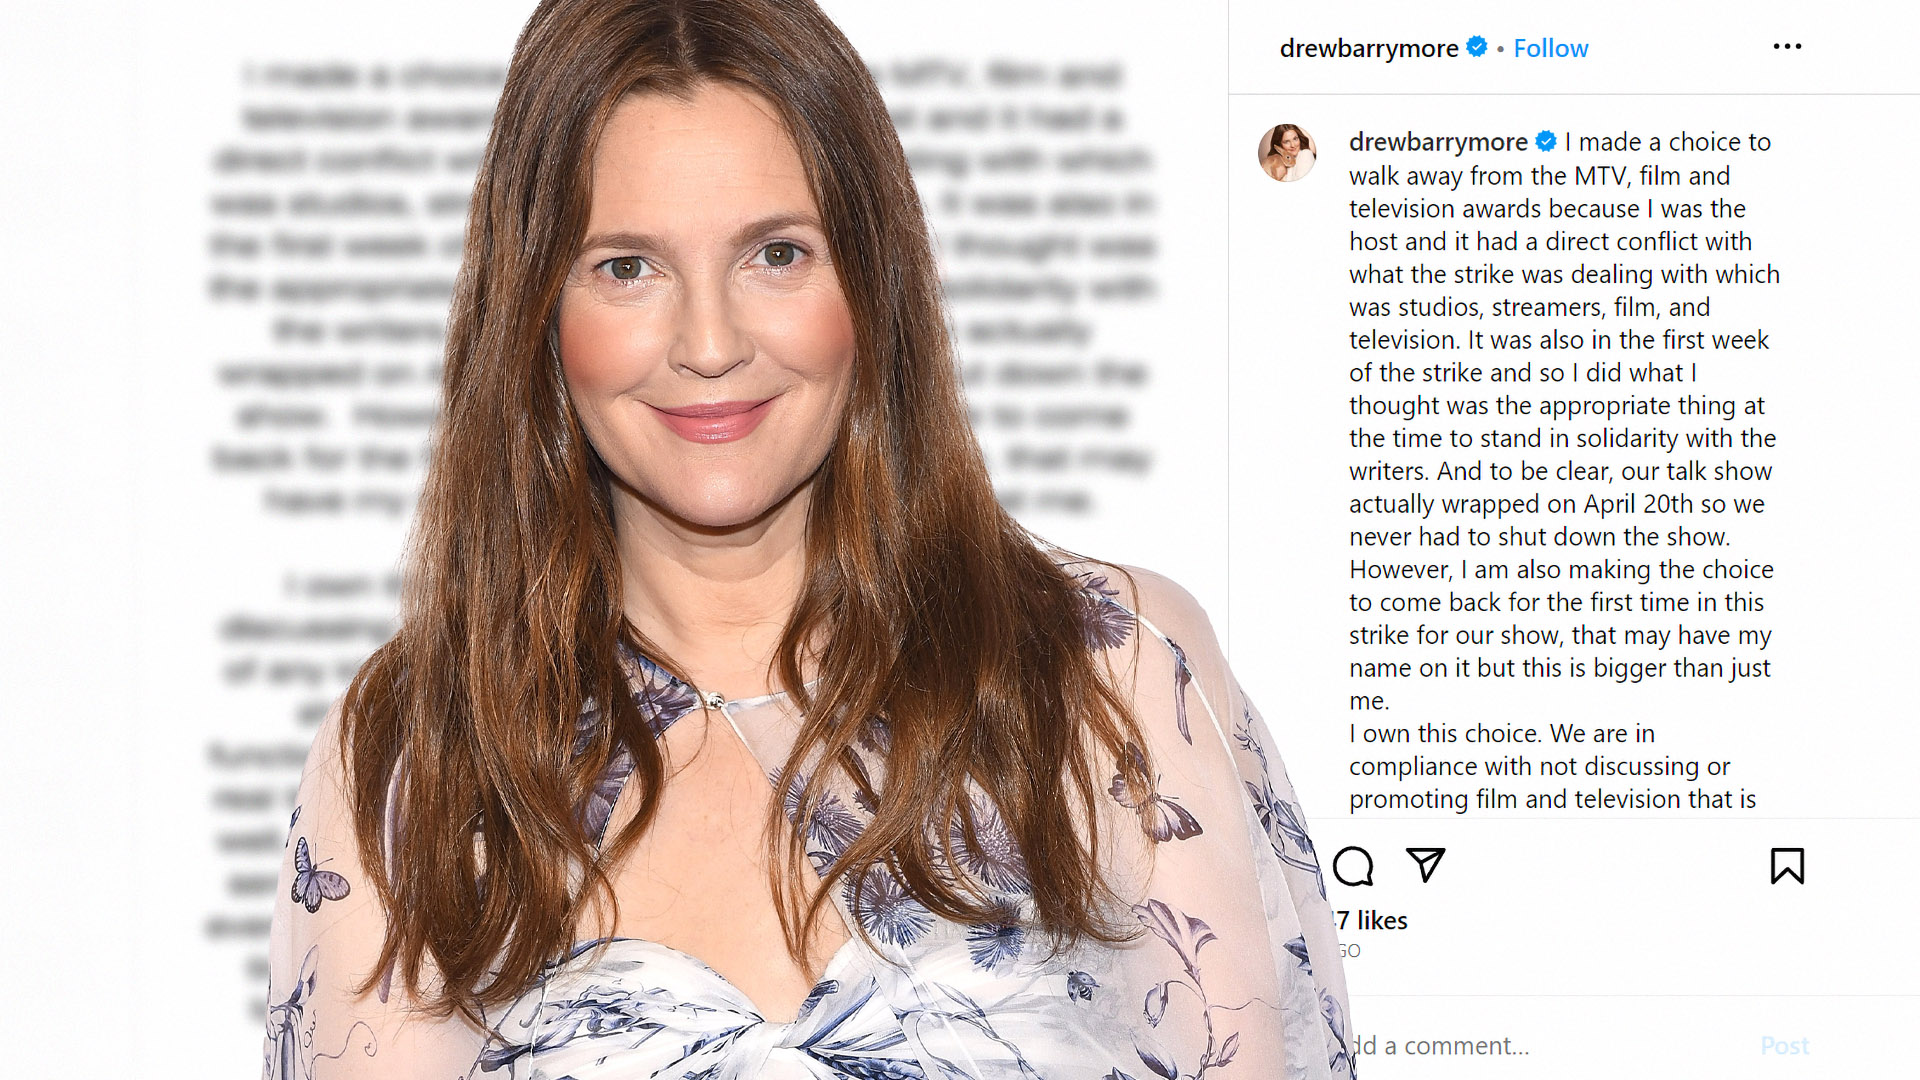 Drew Barrymore's Talk Show Backlash Explained: What Happened Exactly?